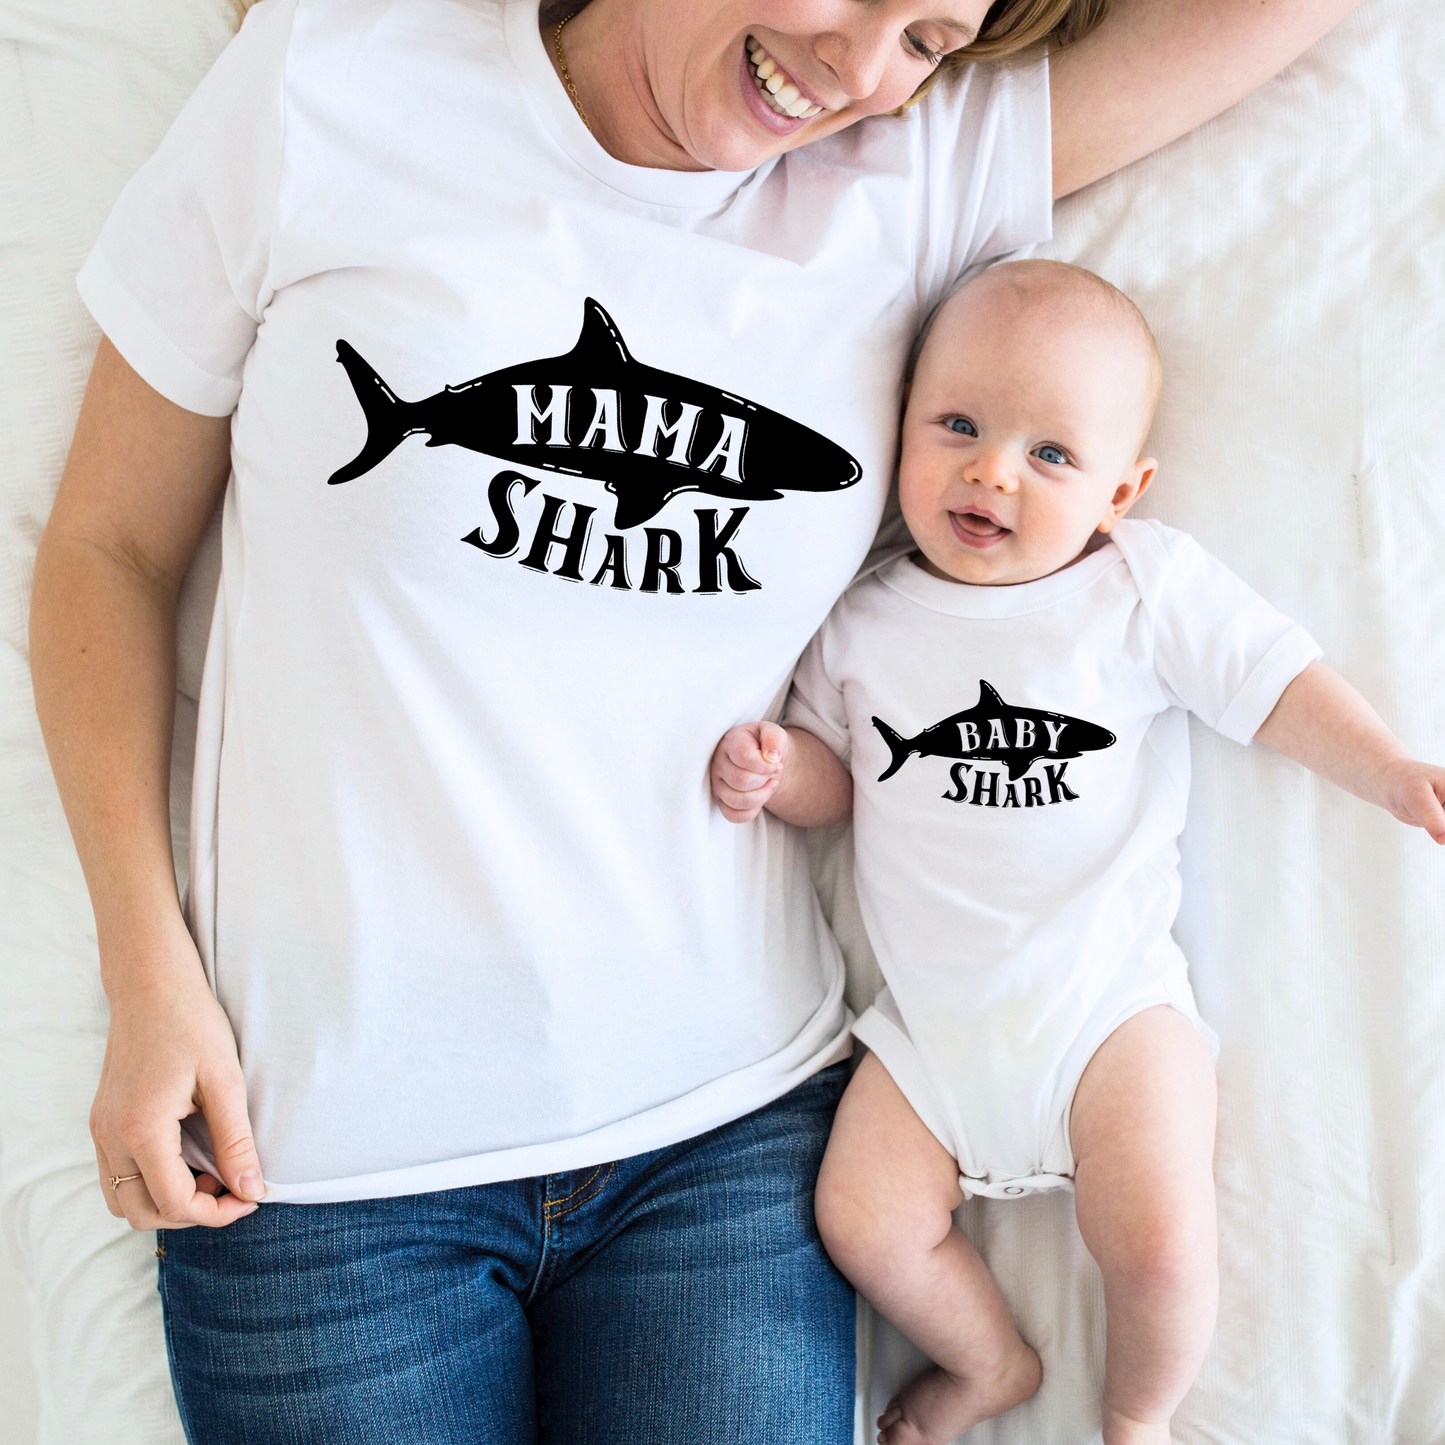 Mama & Baby Shark - Mommy and Me Outfits